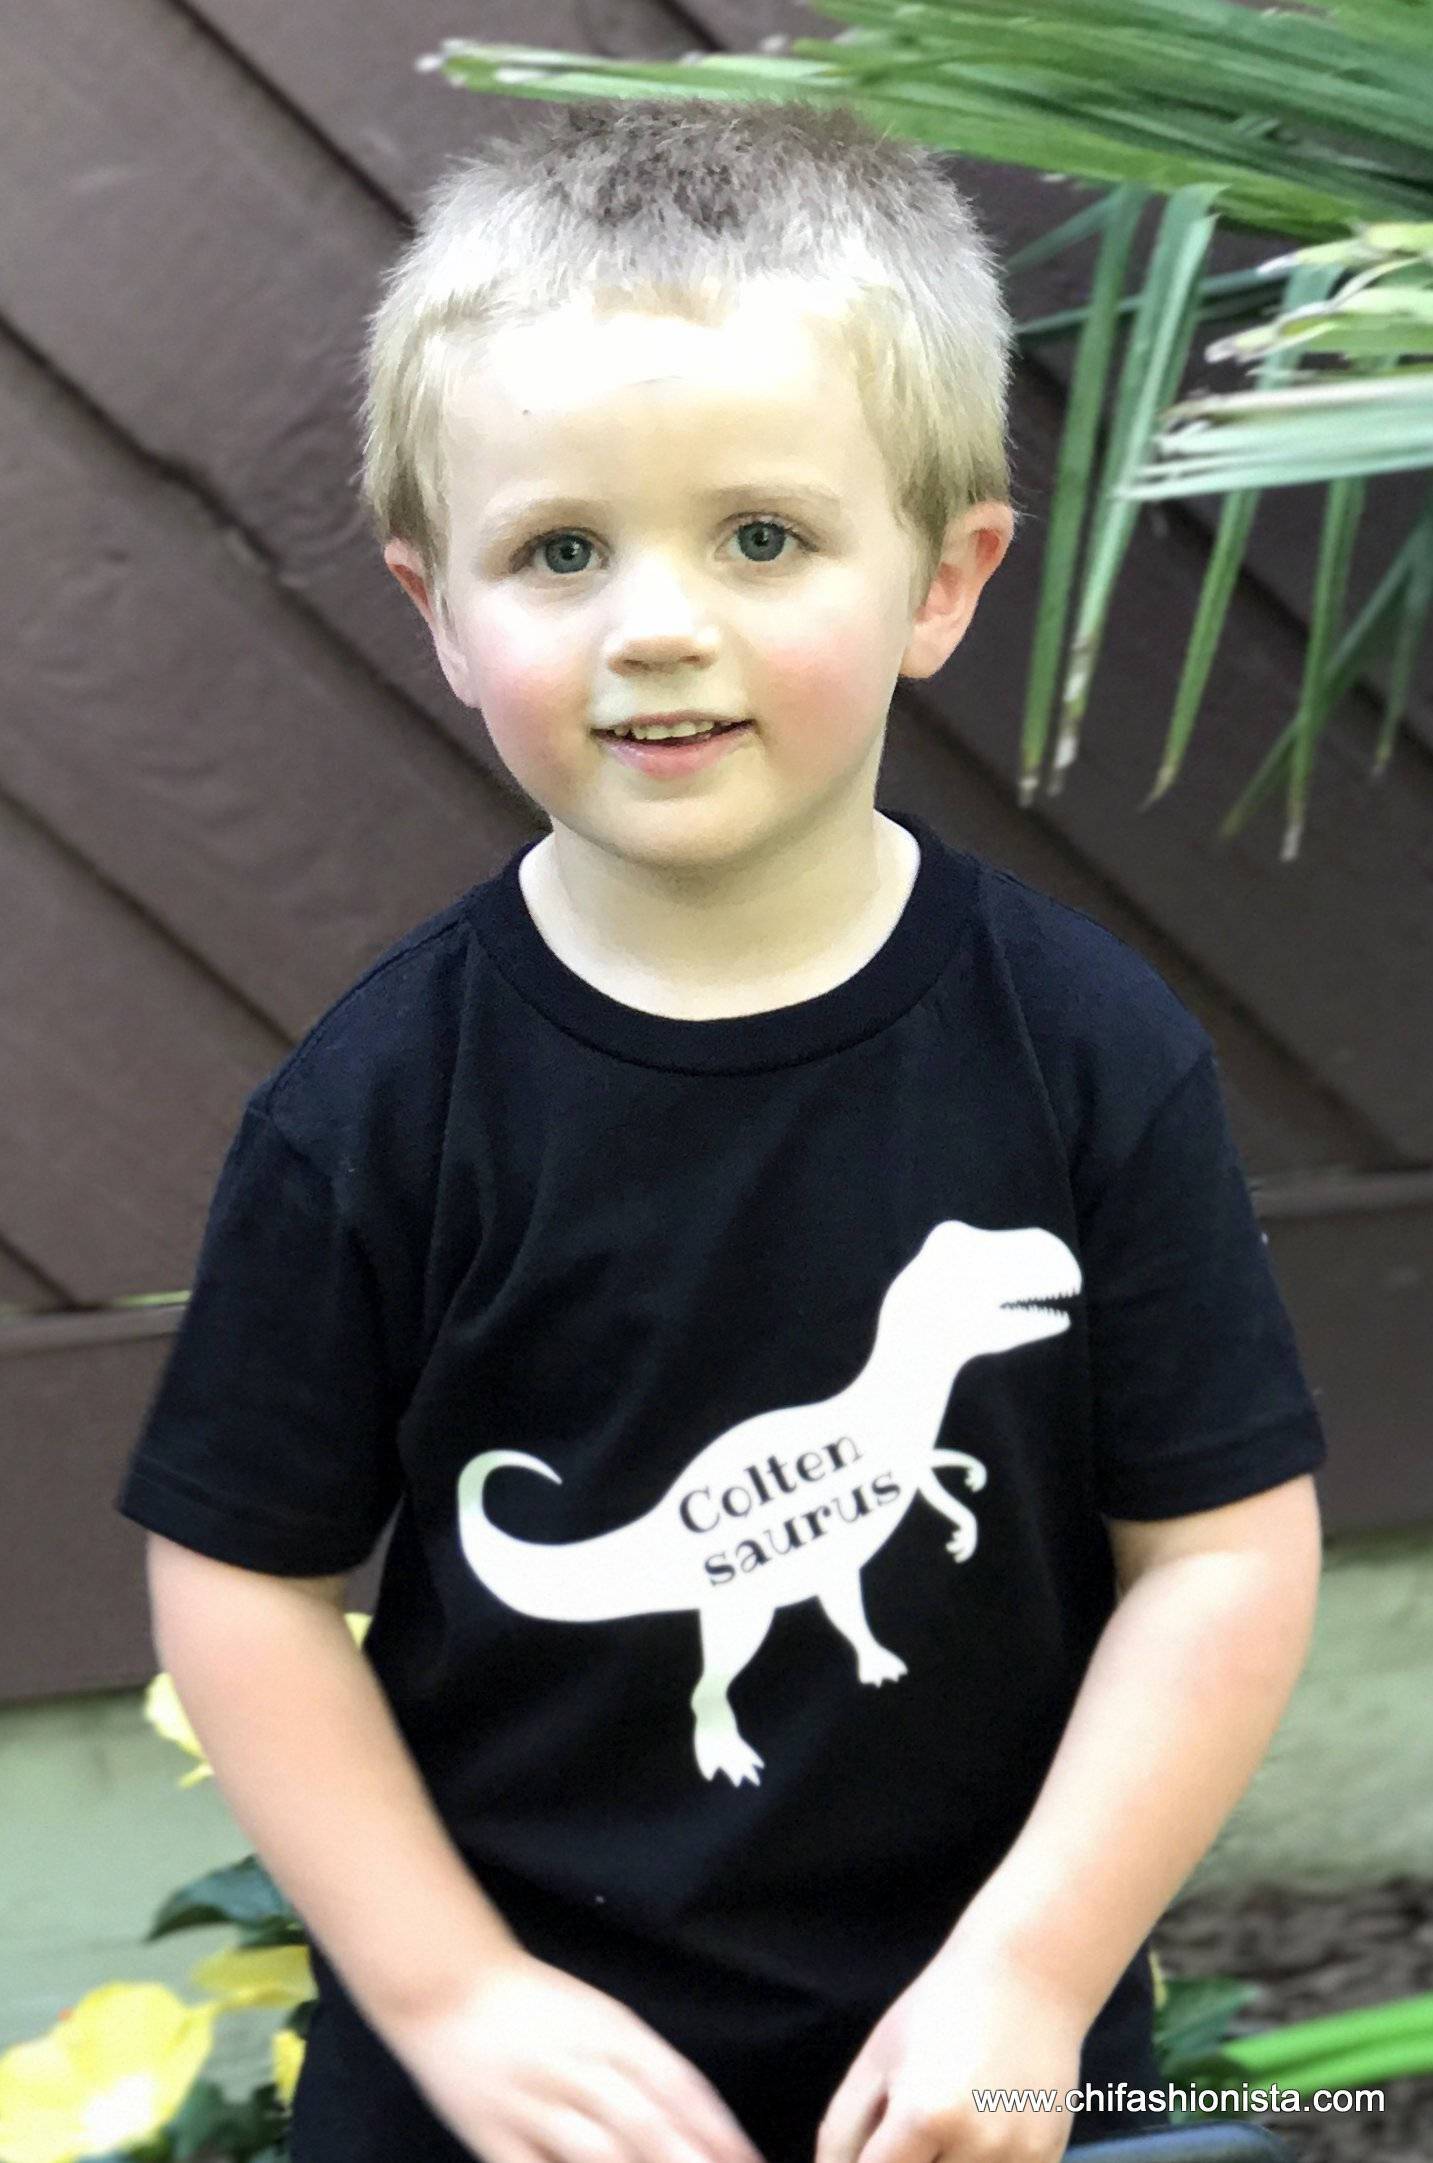 Handcrafted Children's Clothing, Clothing for Children and Parents, Dinosaur Name Shirt, chi-fashionista